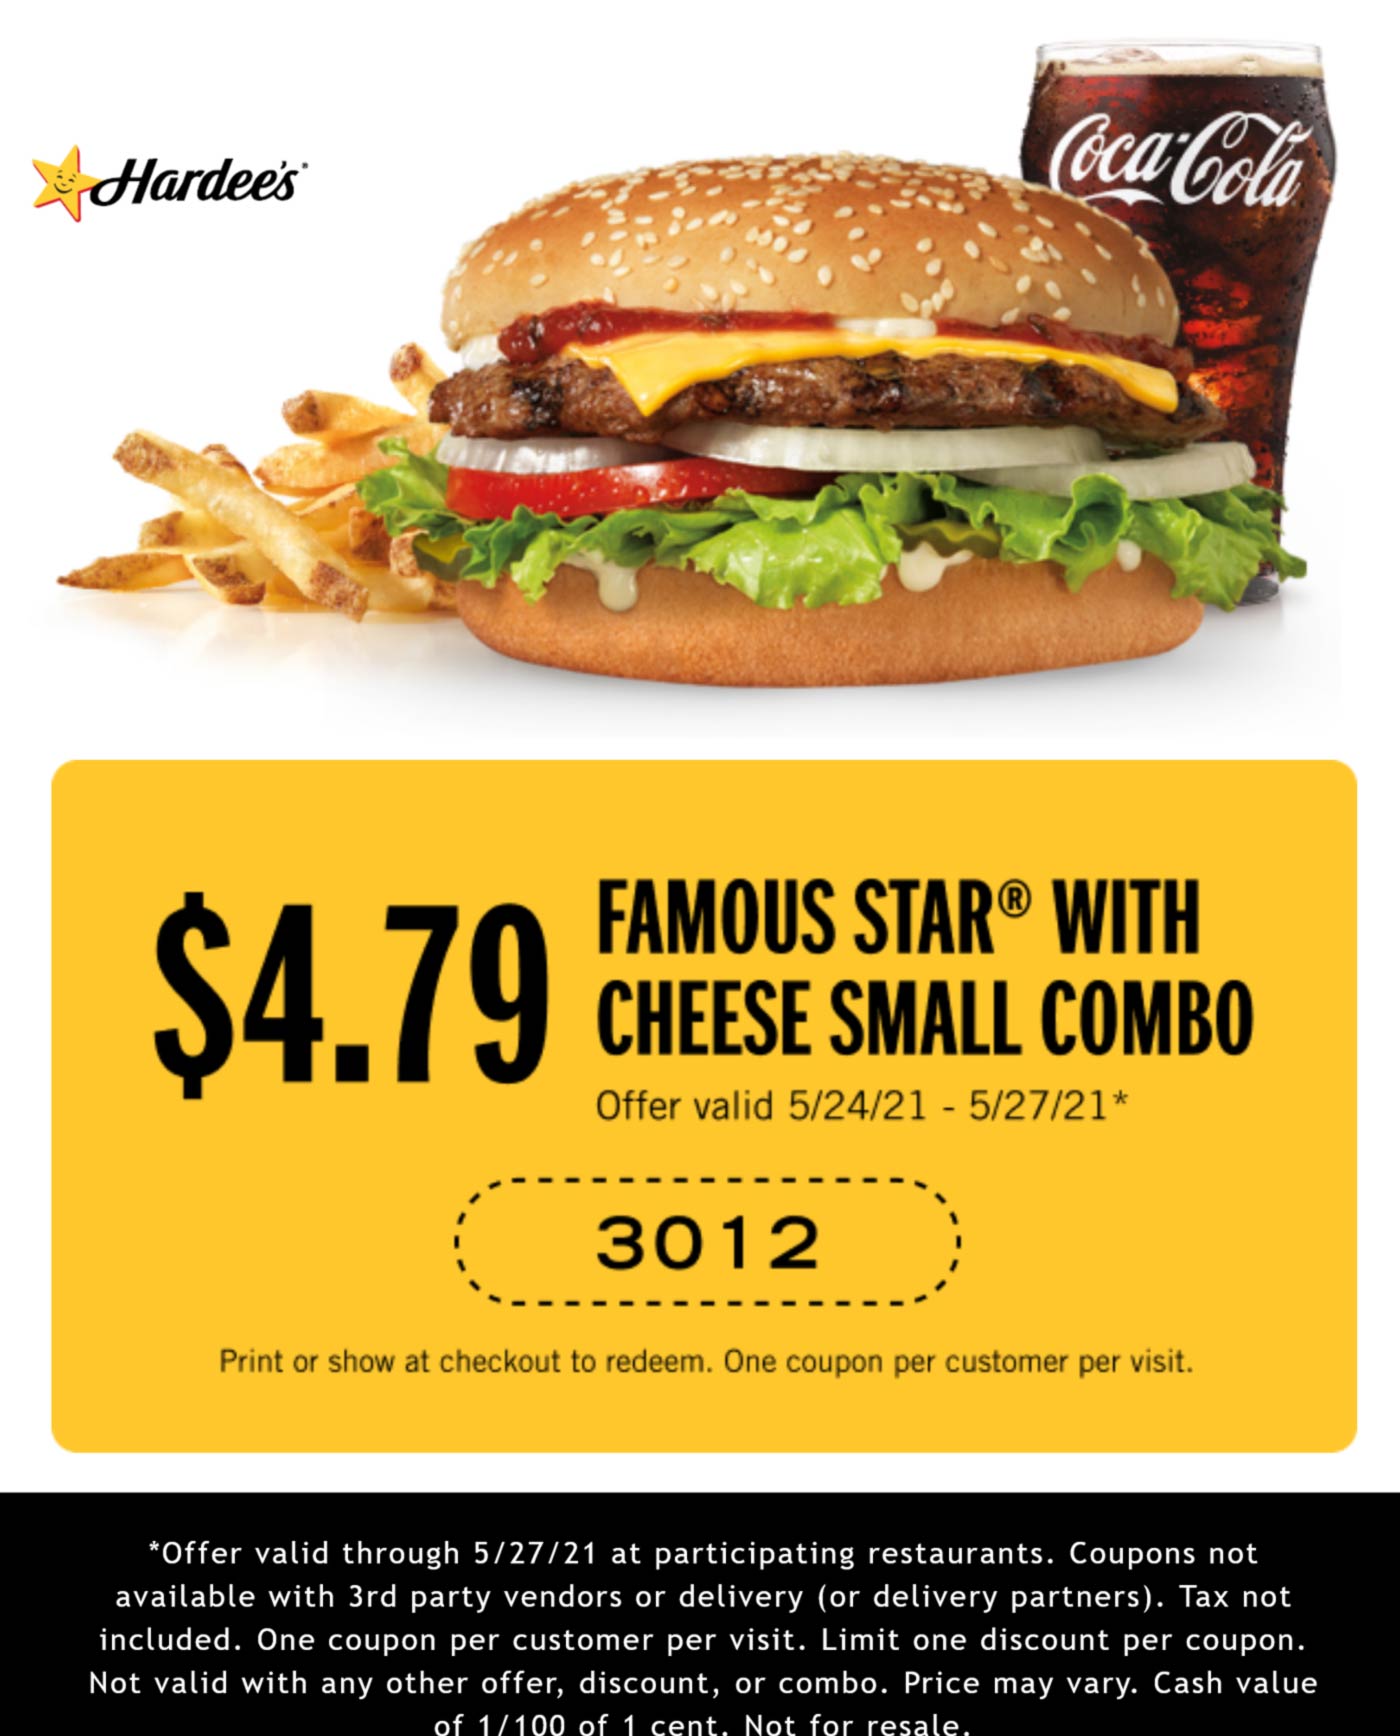 Hardees restaurants Coupon  Famous star cheeseburger combo meal = $4.79 at Hardees #hardees 